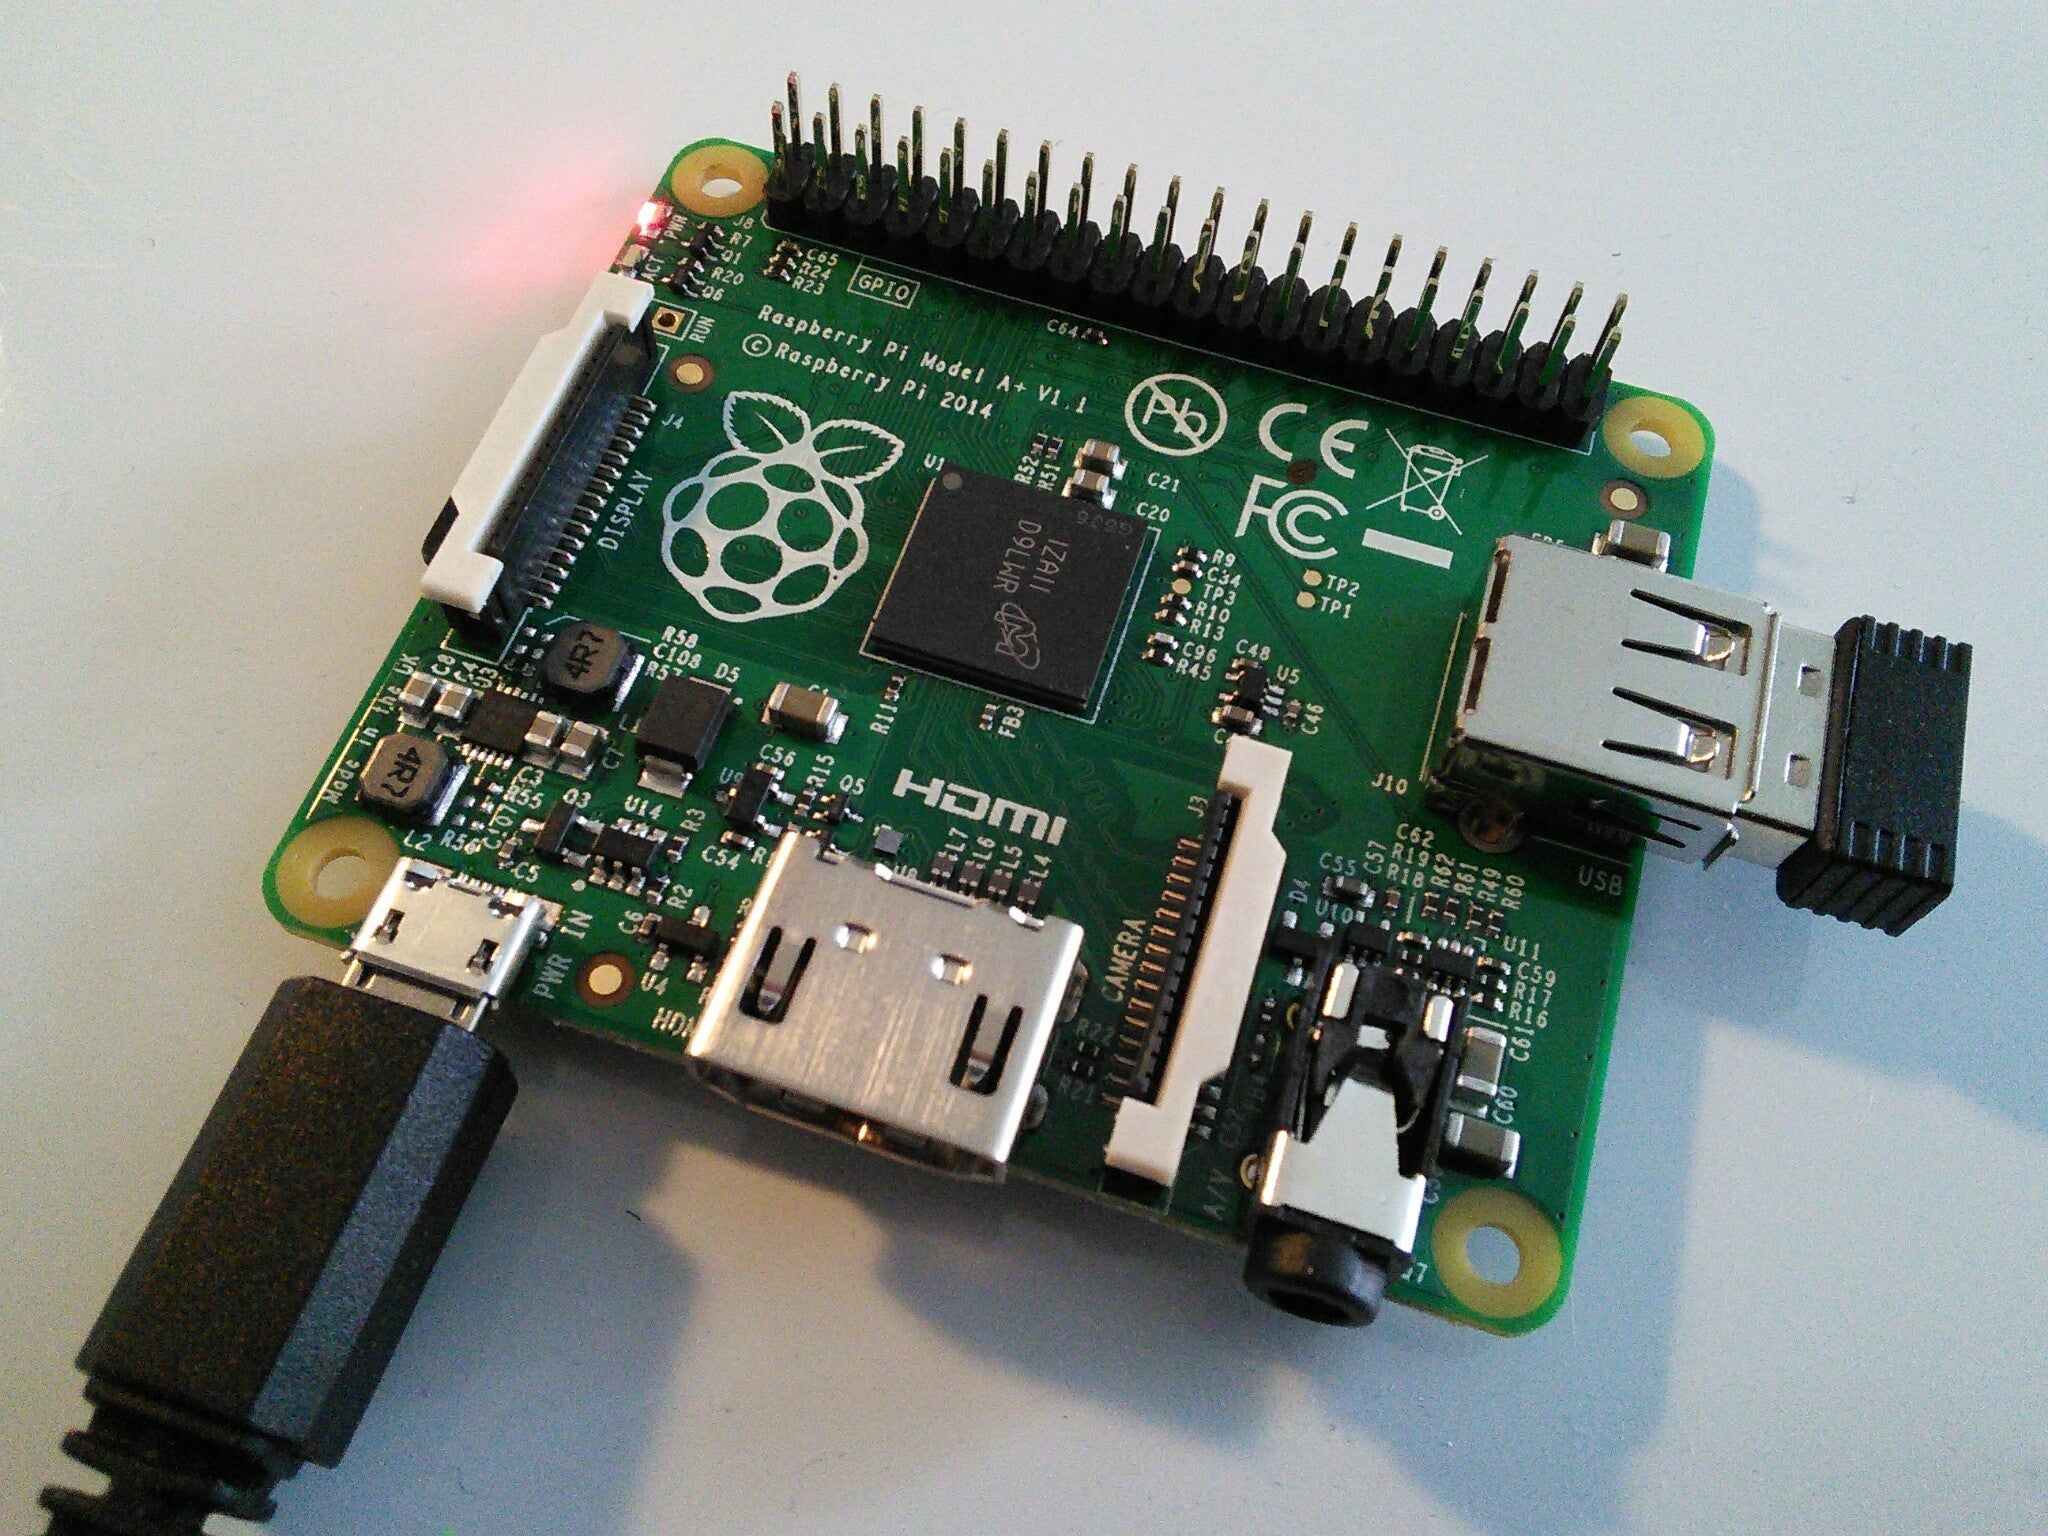 Powering up the Raspberry Pi A+ board